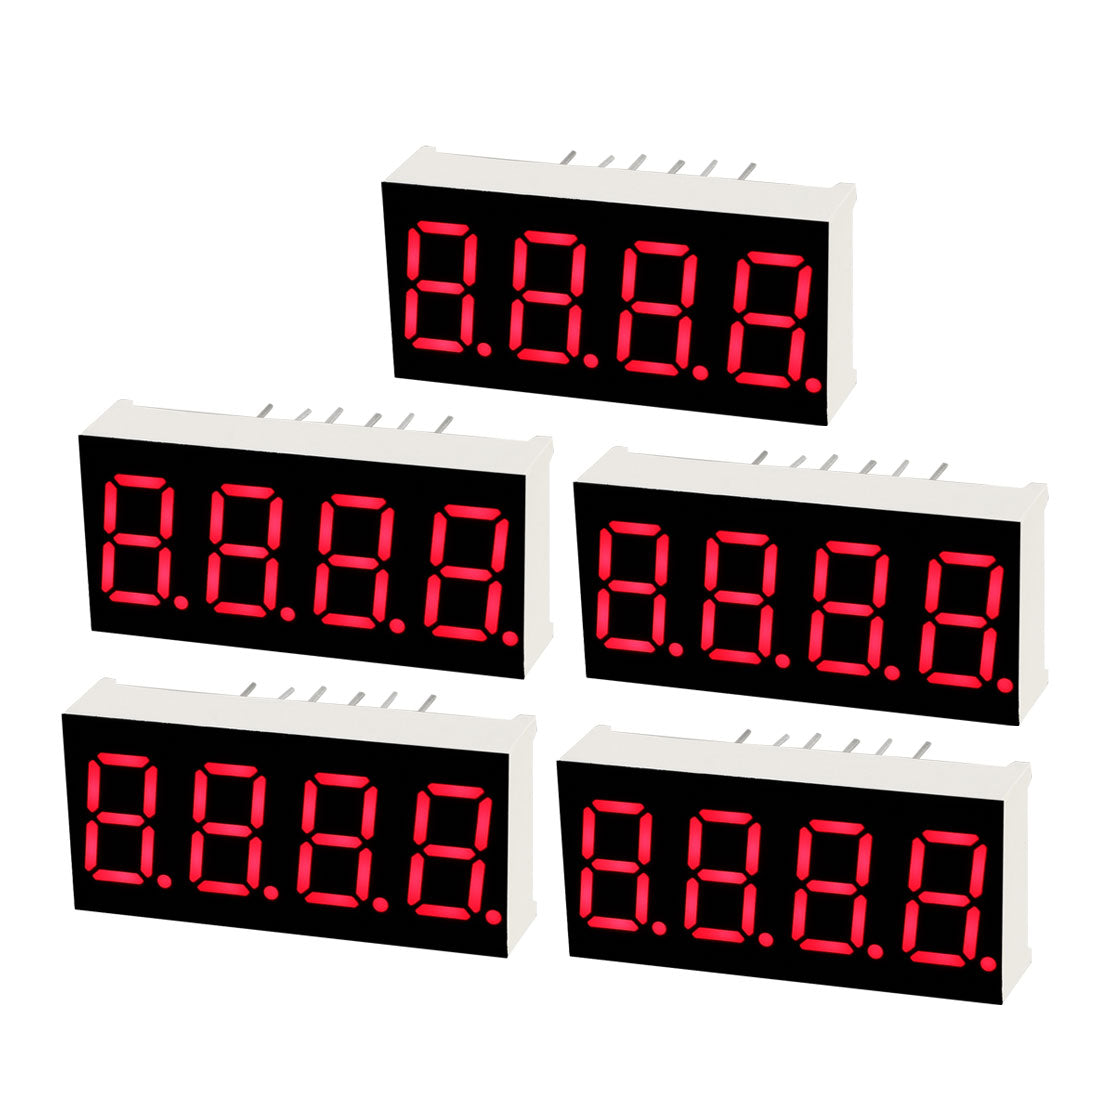 uxcell Uxcell Common Anode 12 Pin 4 Bit 7 Segment 1.18 x 0.55 x 0.28 Inch 0.35" Red LED Display Digital Tube 5pcs